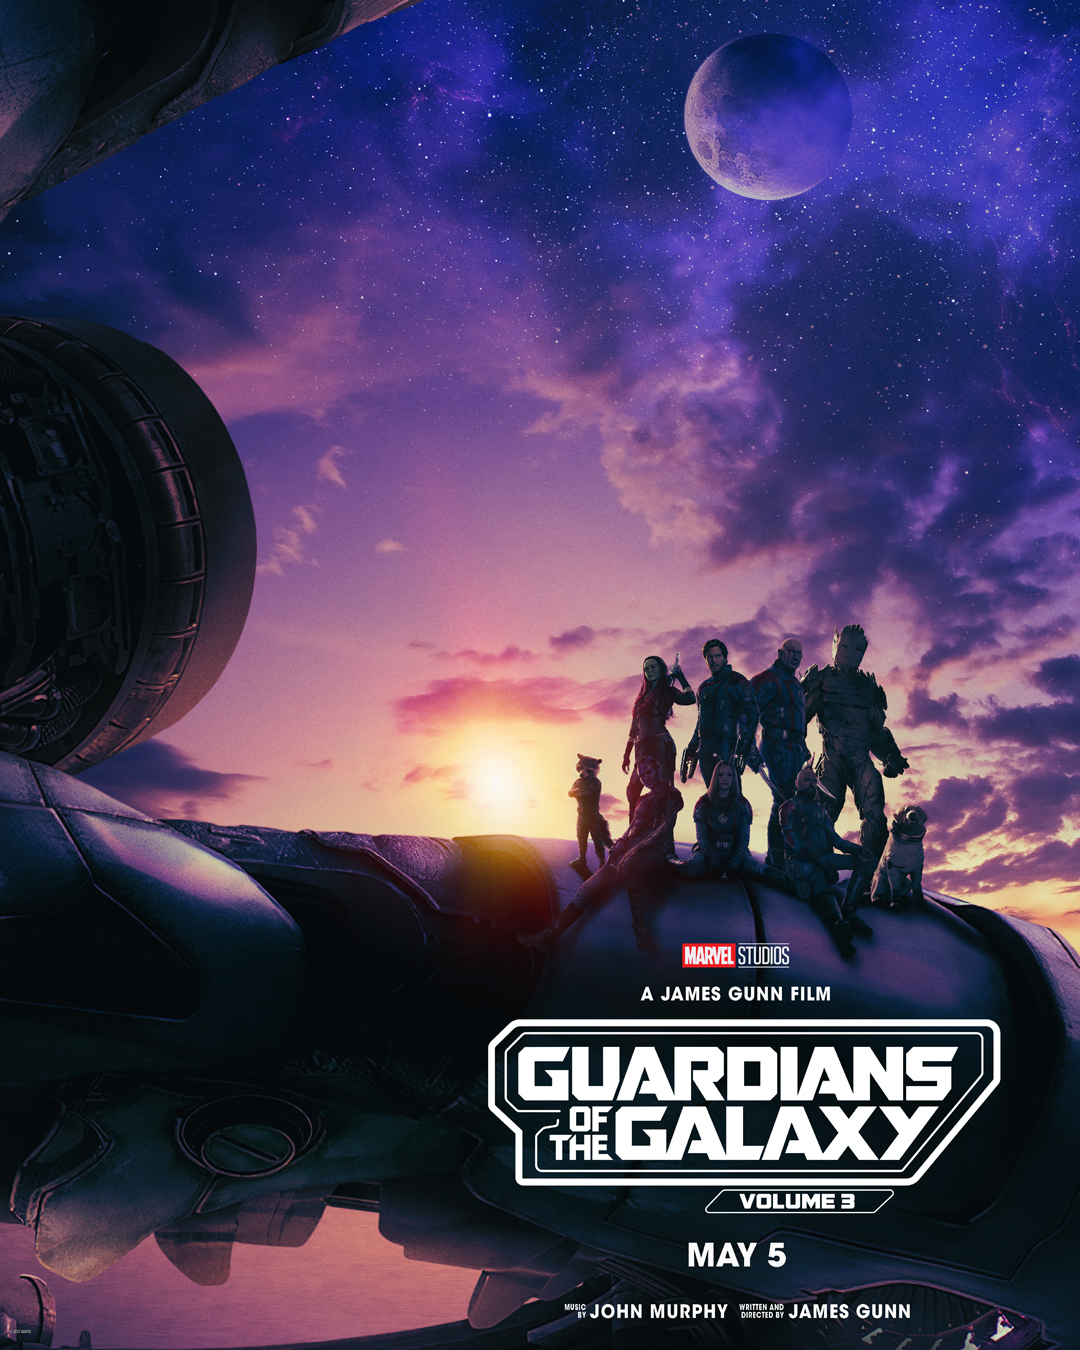 Marvel Studios' Guardians of the Galaxy Vol. 3 | Promotional poster